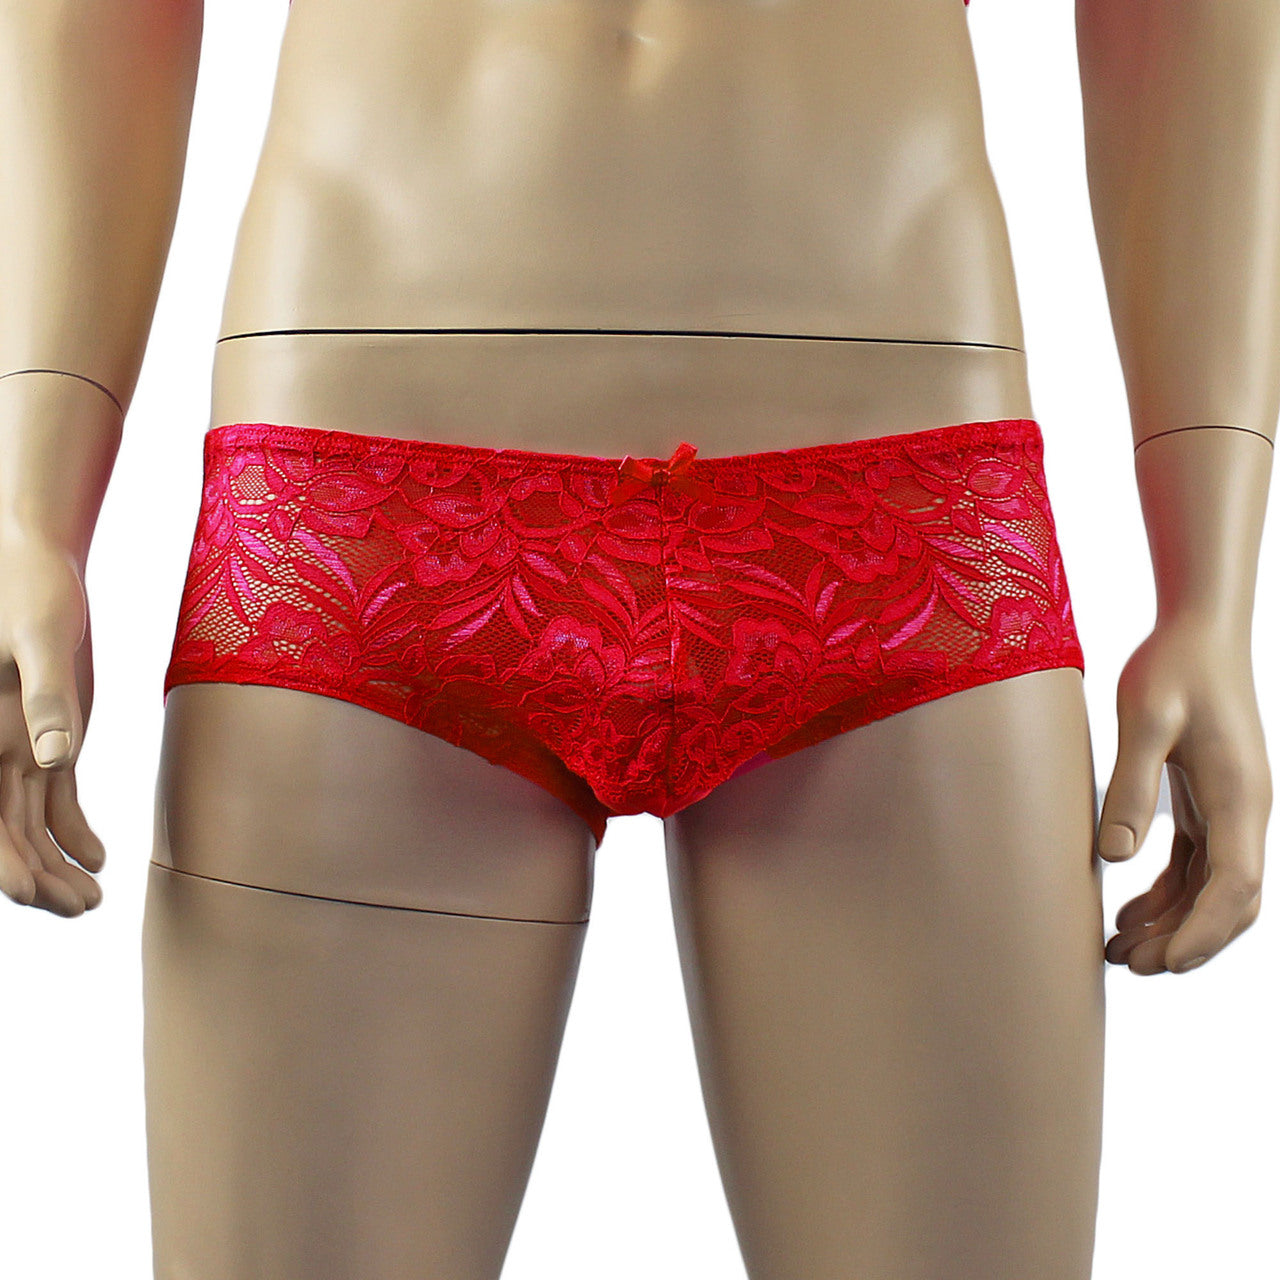 Mens Kristy Lingerie Sexy Lace and Mesh Panty Brief Red